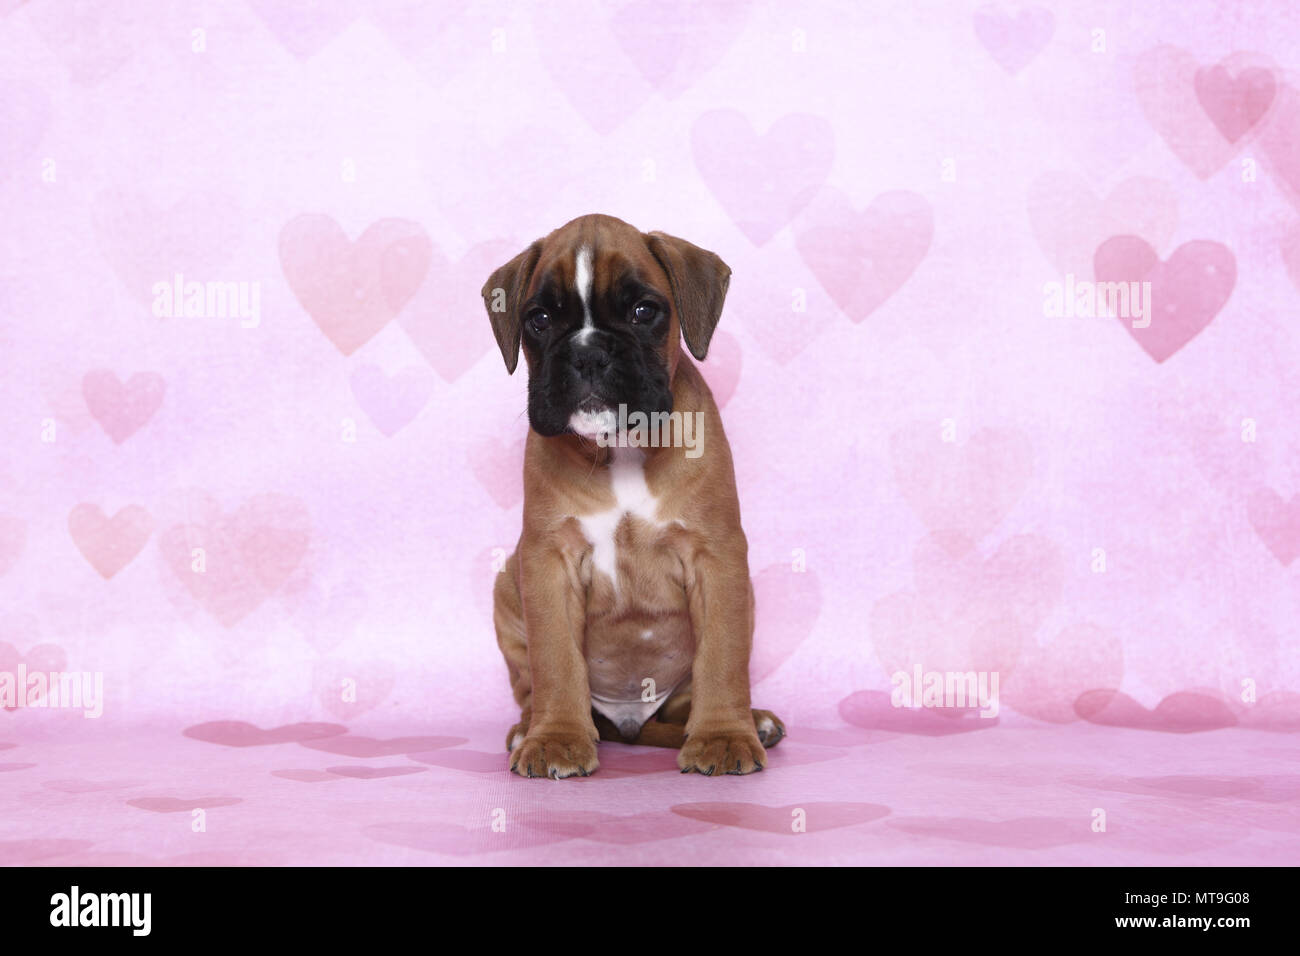 German Boxer. Puppy (7 weeks old) sitting. Studio picture seen against a pink background with heart print. Germany Stock Photo